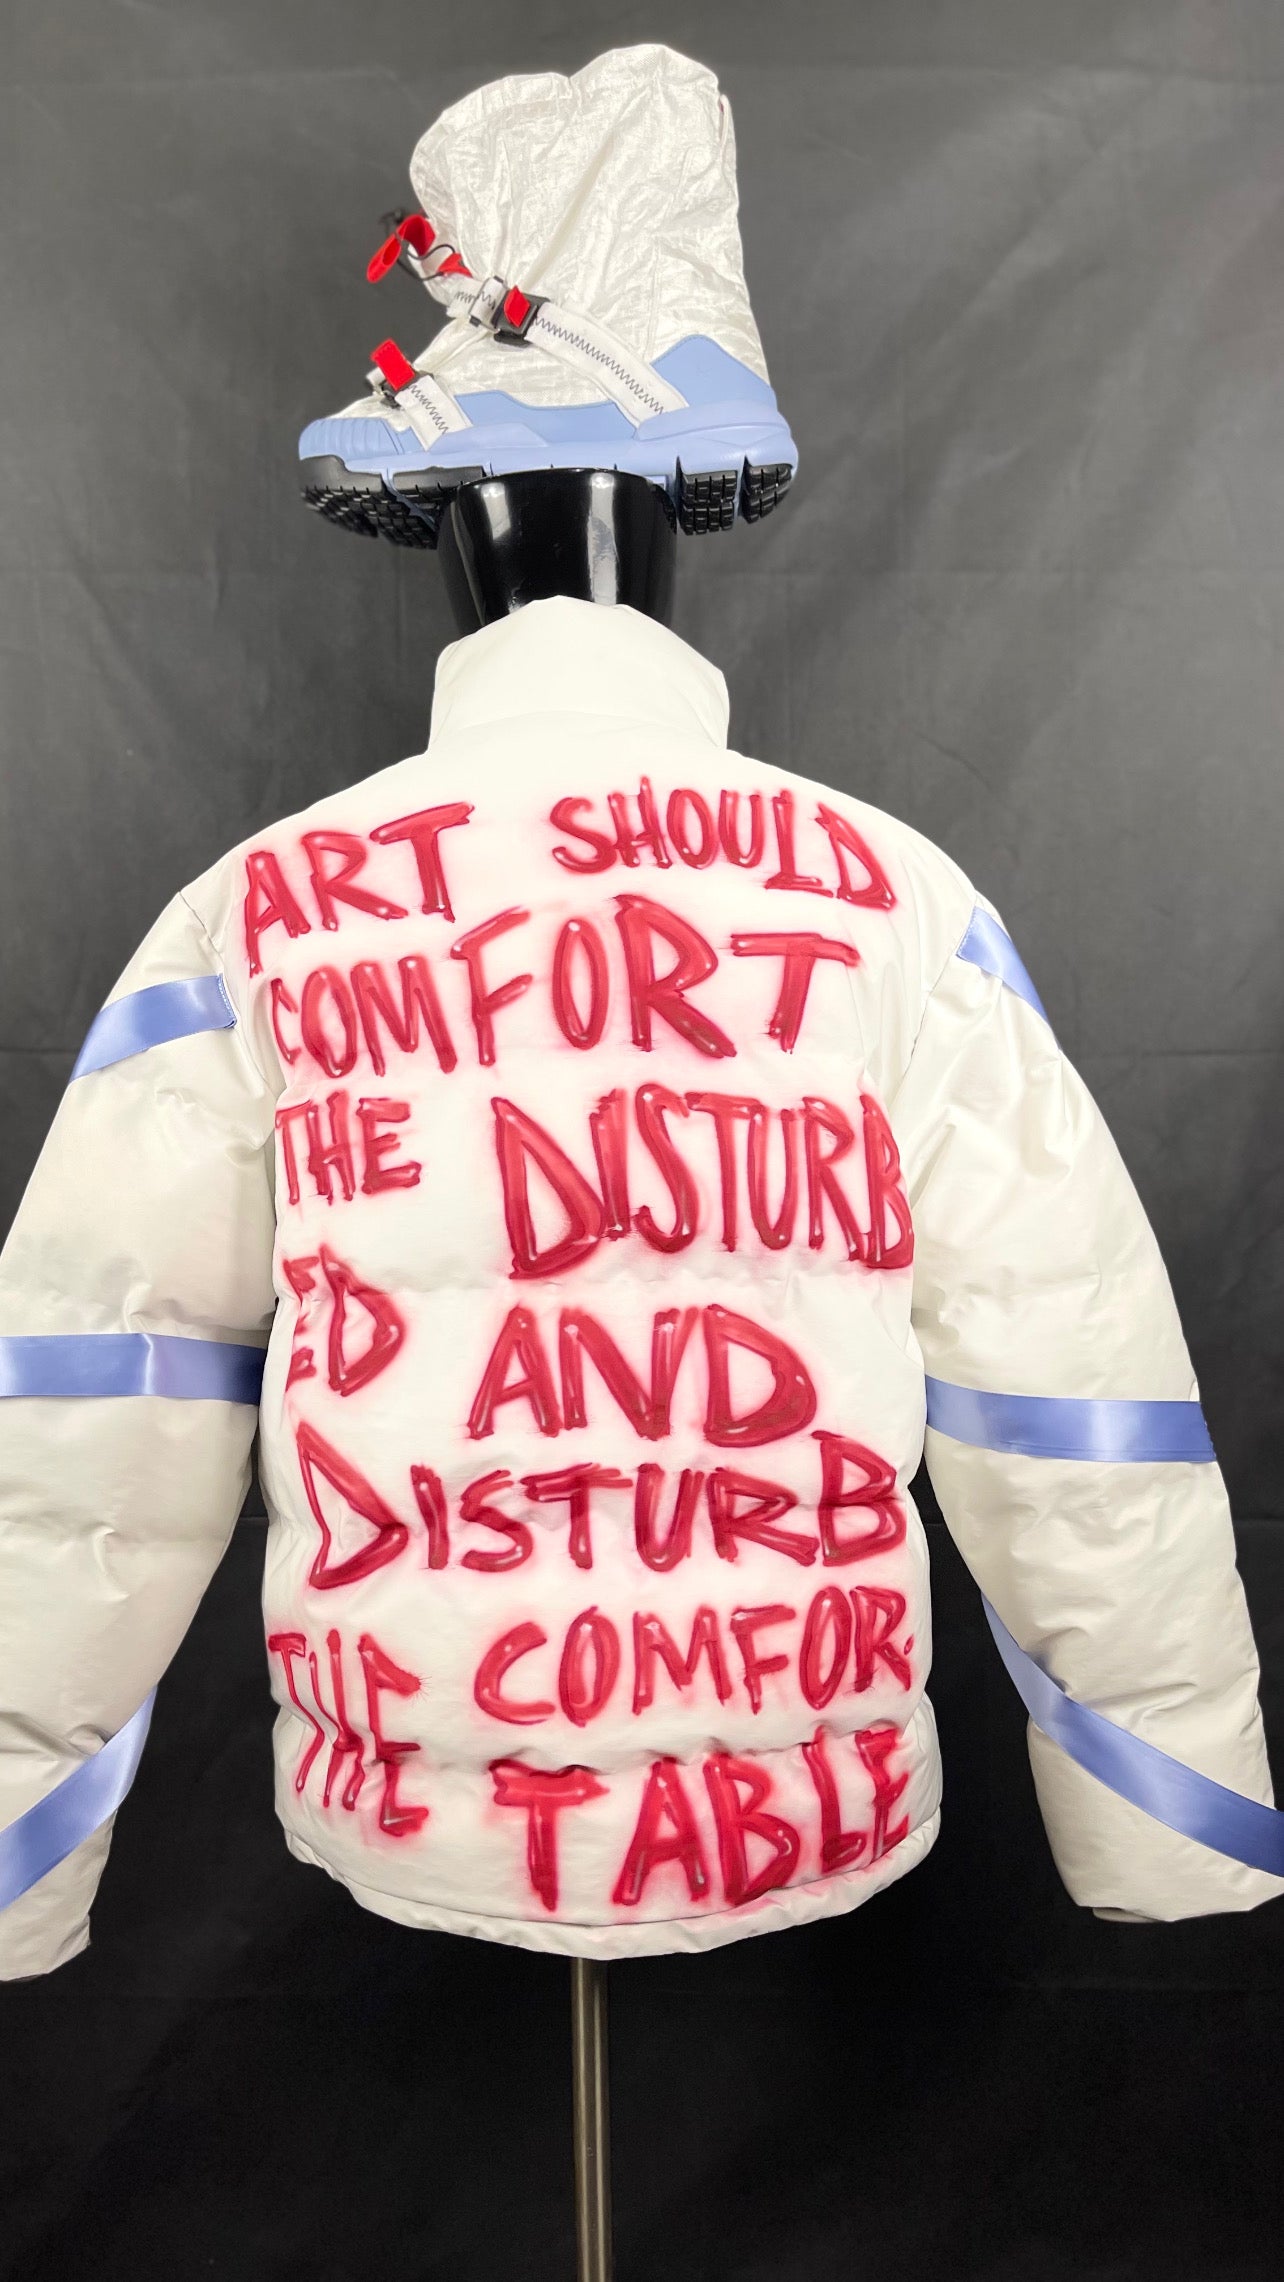 (White) “ART SHOULD COMFORT THE DISTURBED AND DISTURB THE COMFORTABLE” Puffer